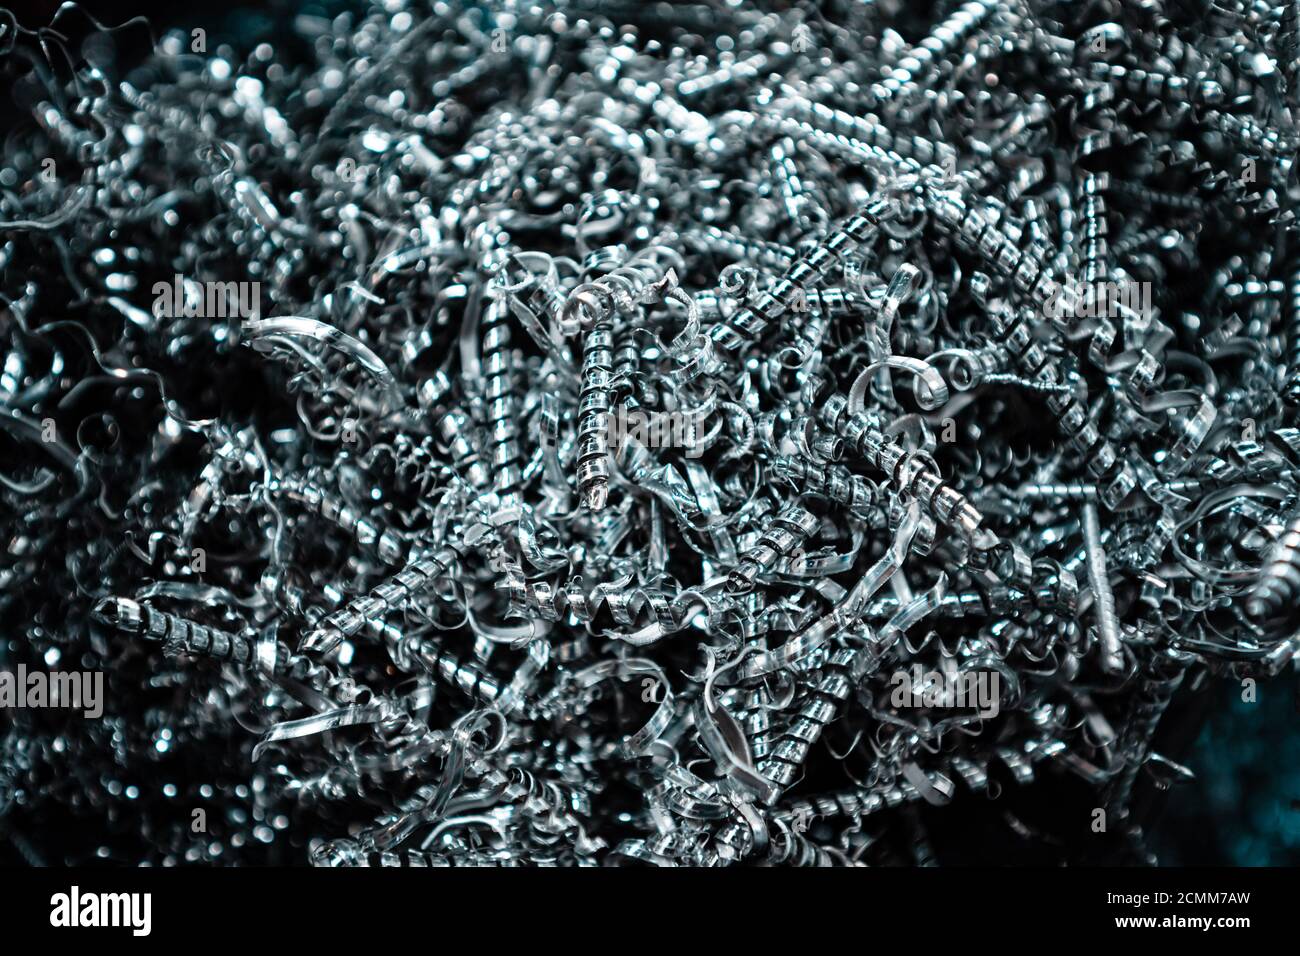 A pile of metal spirals as burr waste in metal processing. Stock Photo